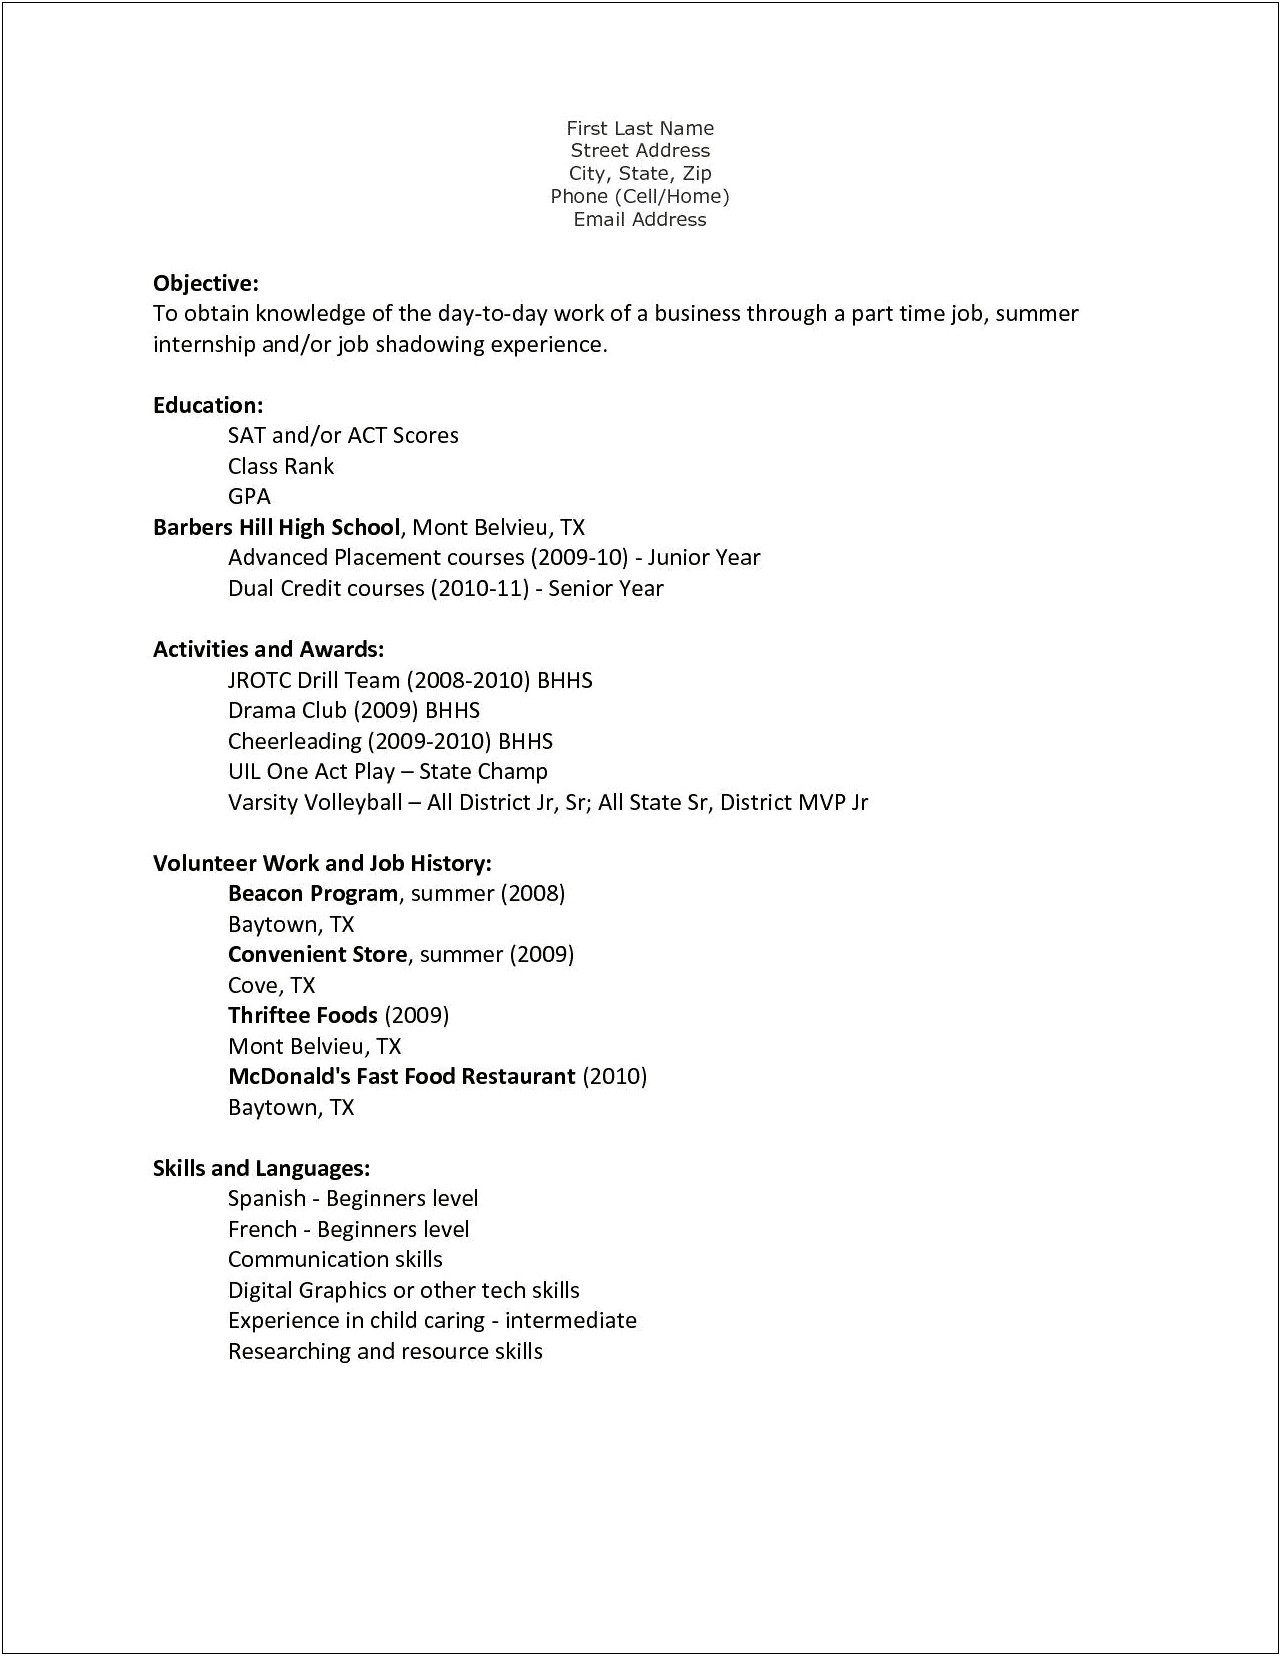 Example Of A Part Time Job Resume